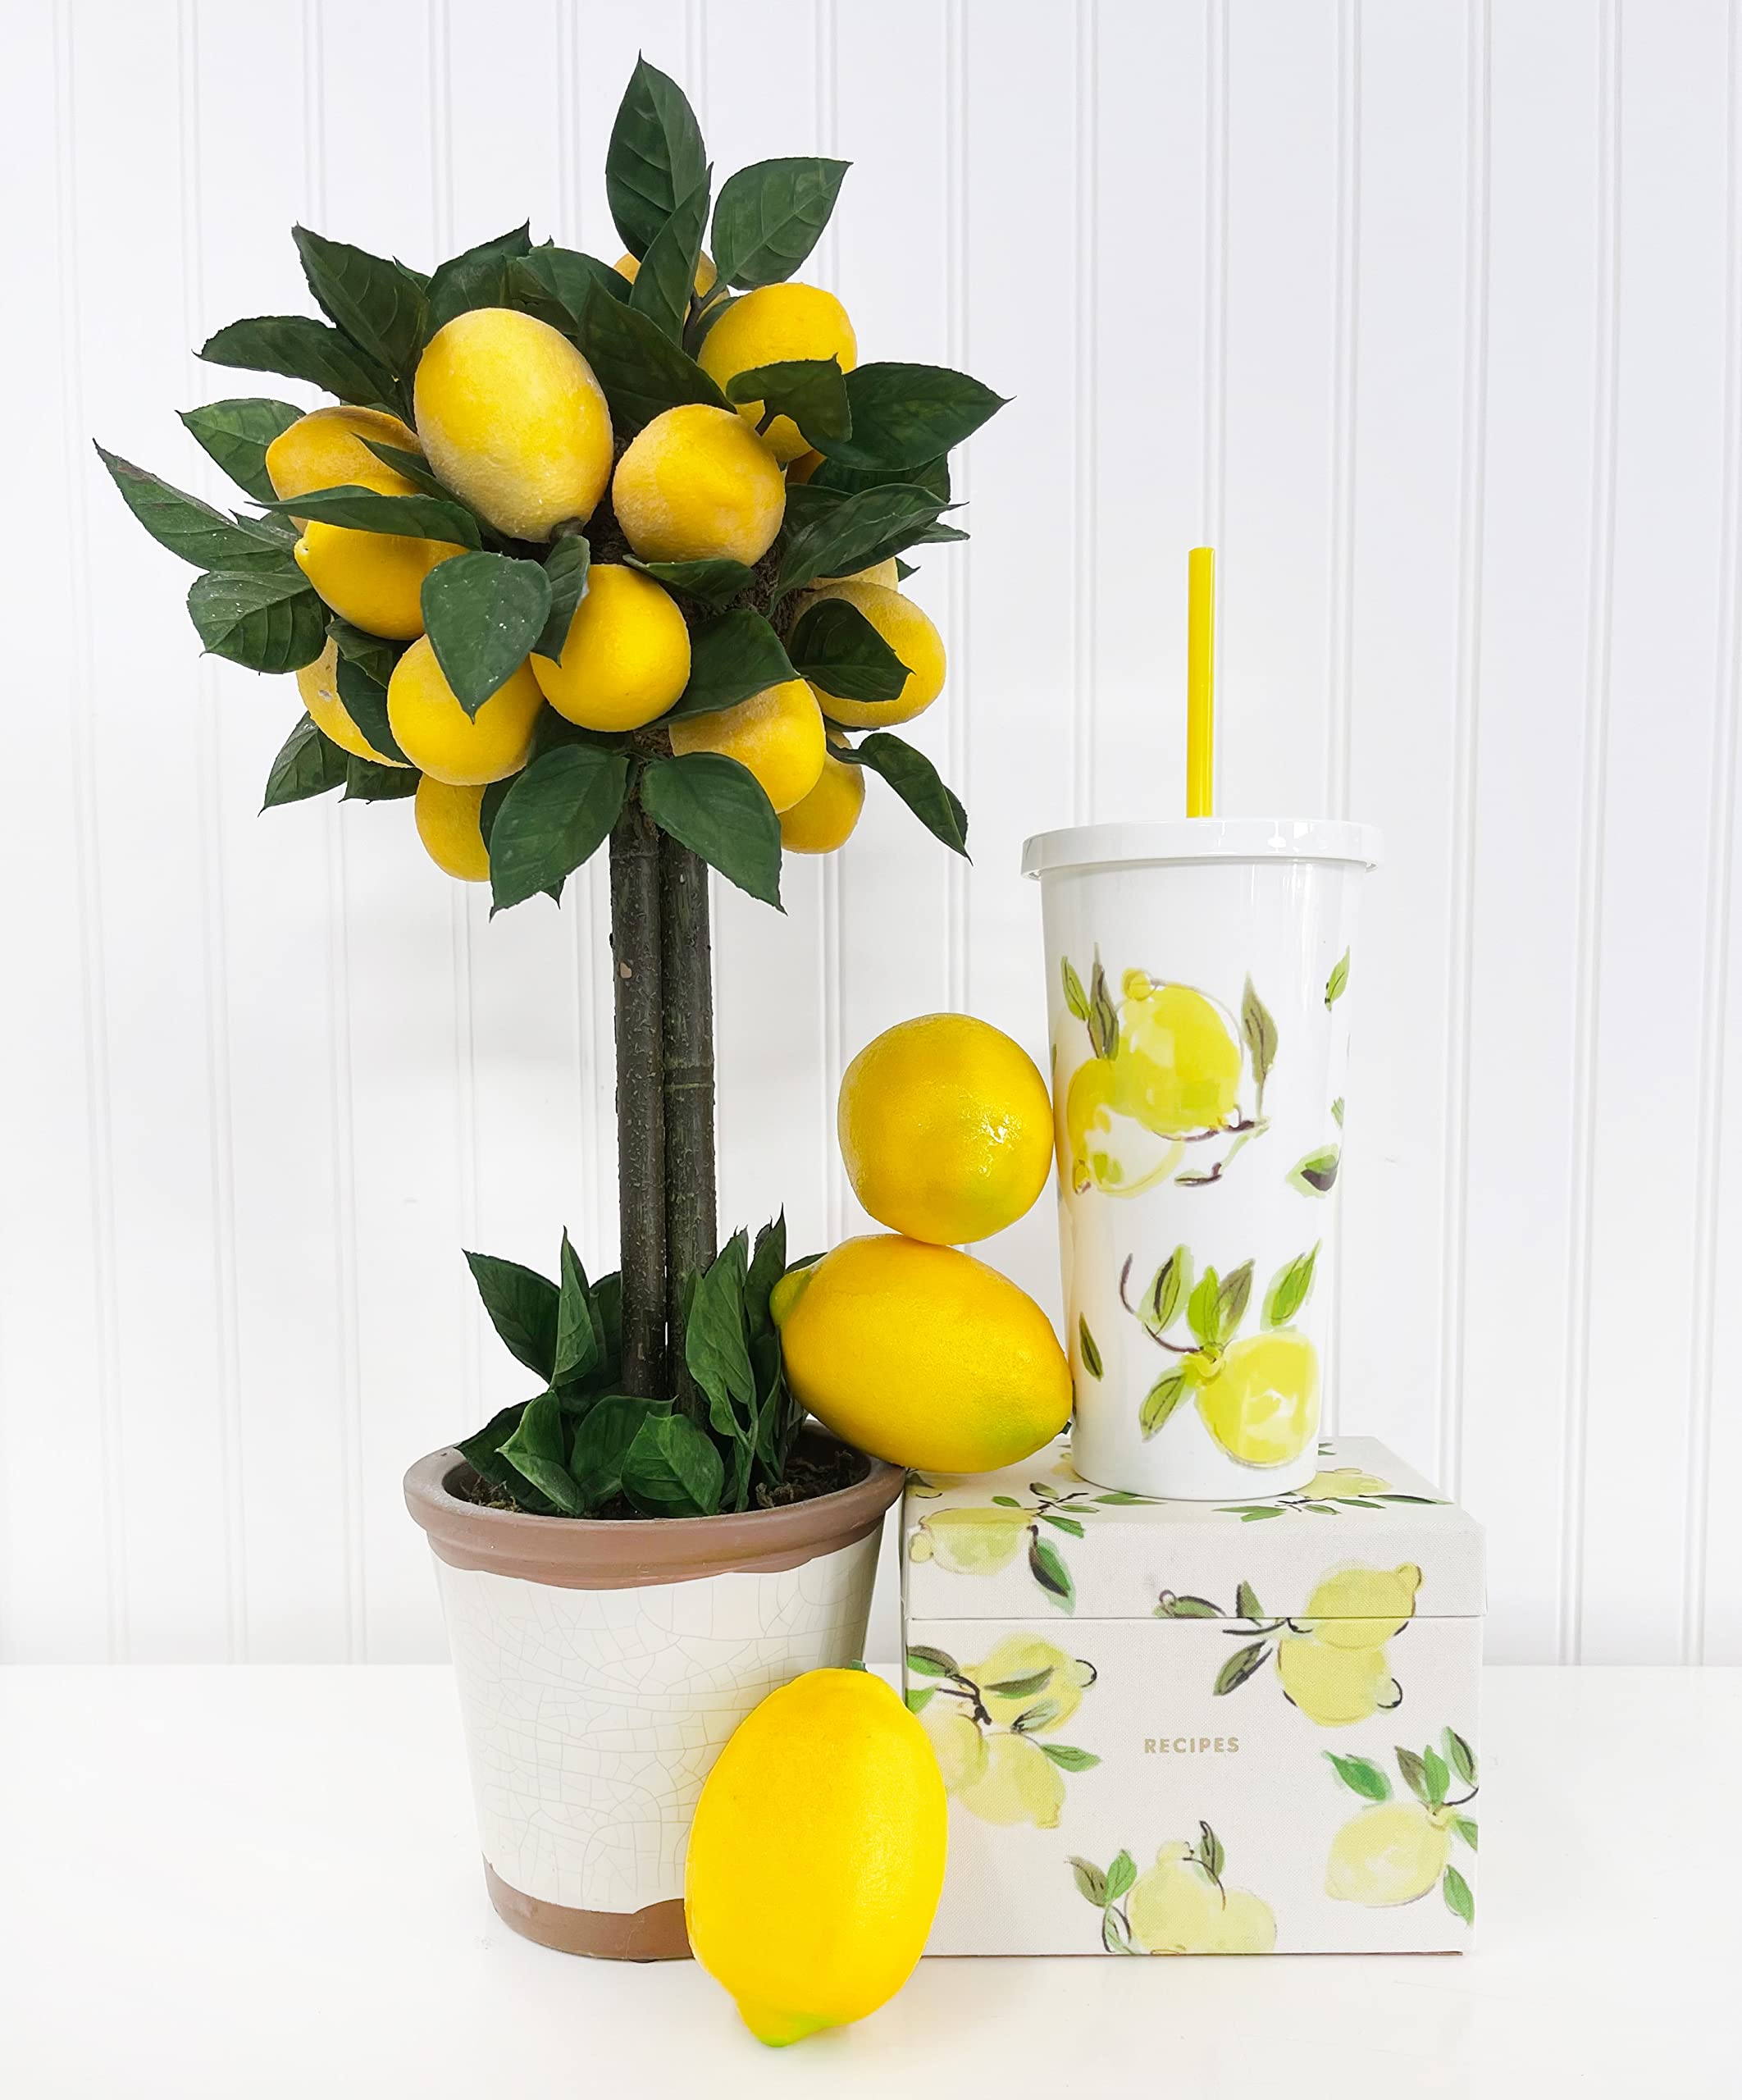 Kate Spade New York Insulated Tumbler with Reusable Straw, 20 Ounce Travel Cup with Lid, Lemons